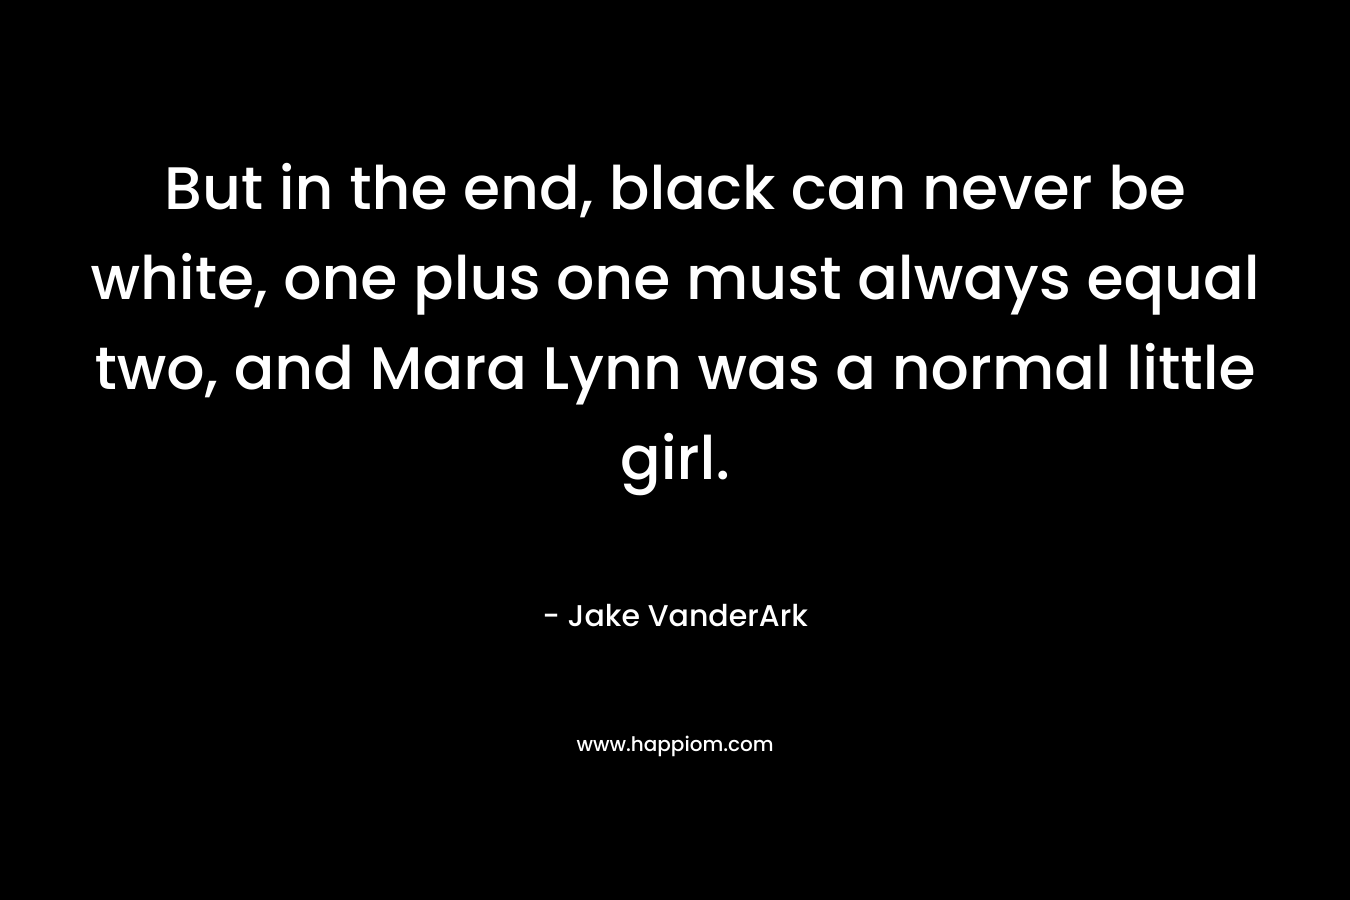 But in the end, black can never be white, one plus one must always equal two, and Mara Lynn was a normal little girl. – Jake VanderArk